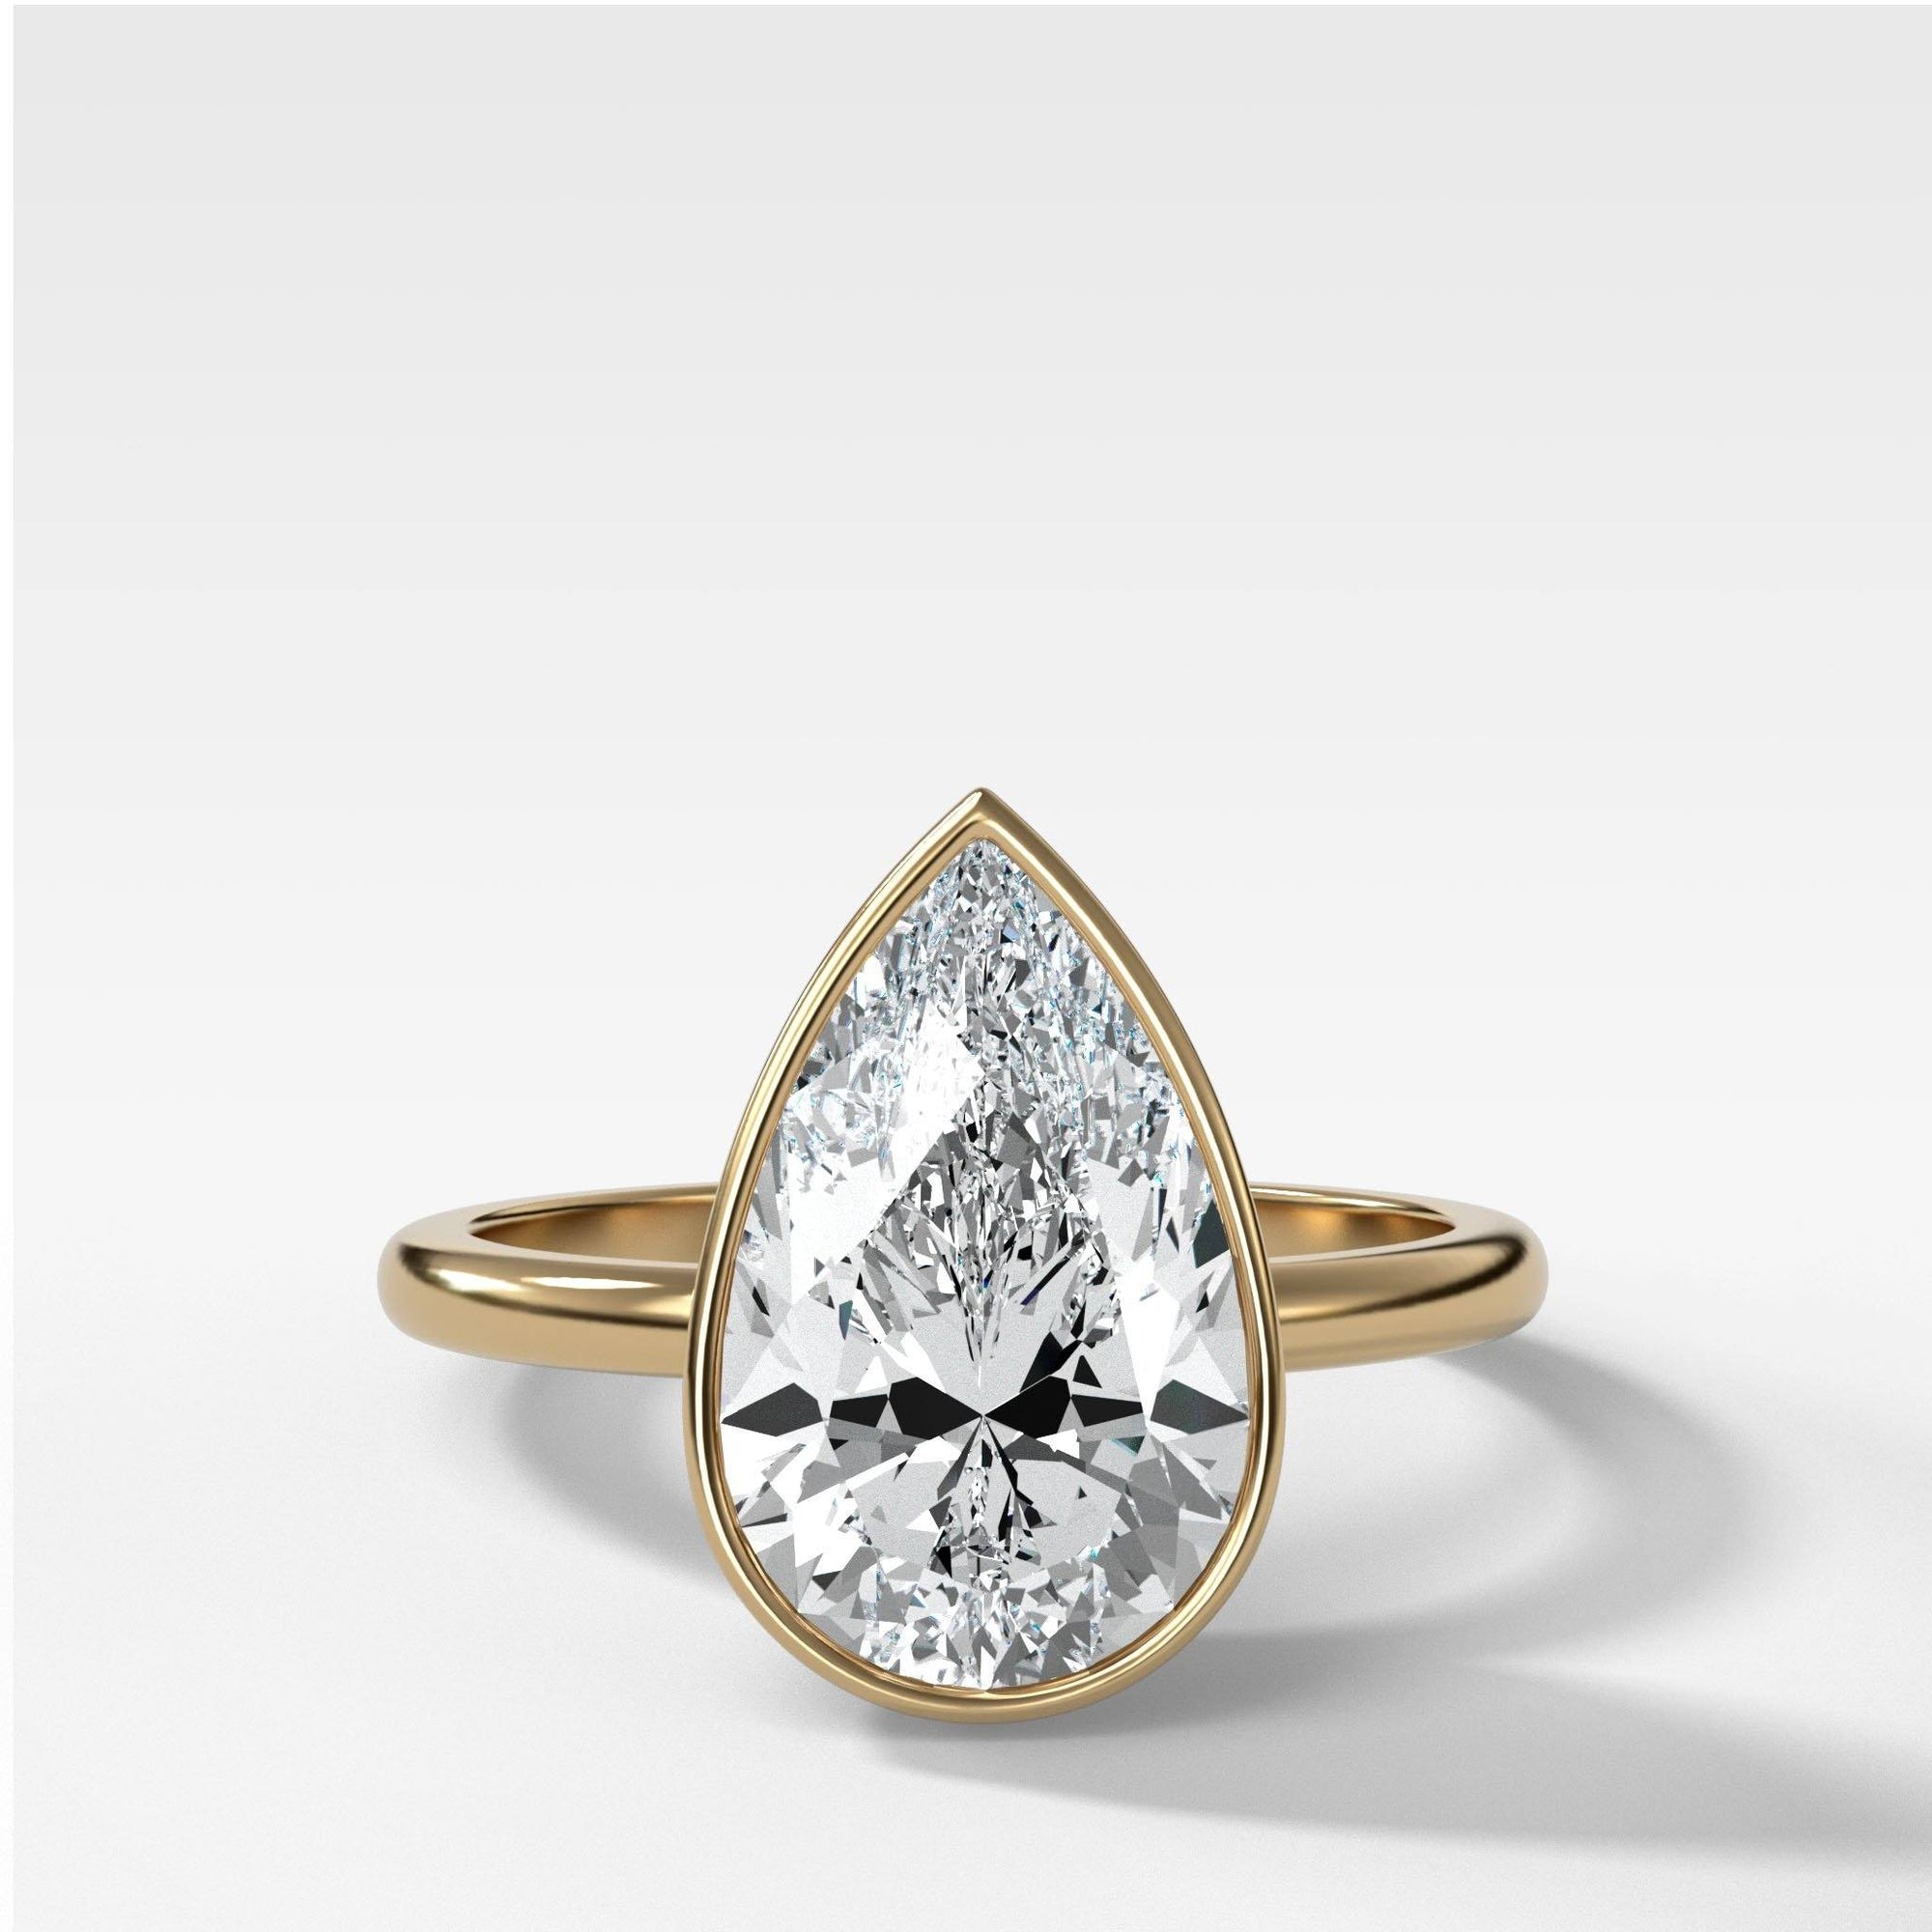 Bezel Penumbra Solitaire With Pear Cut by Good Stone in Yellow Gold